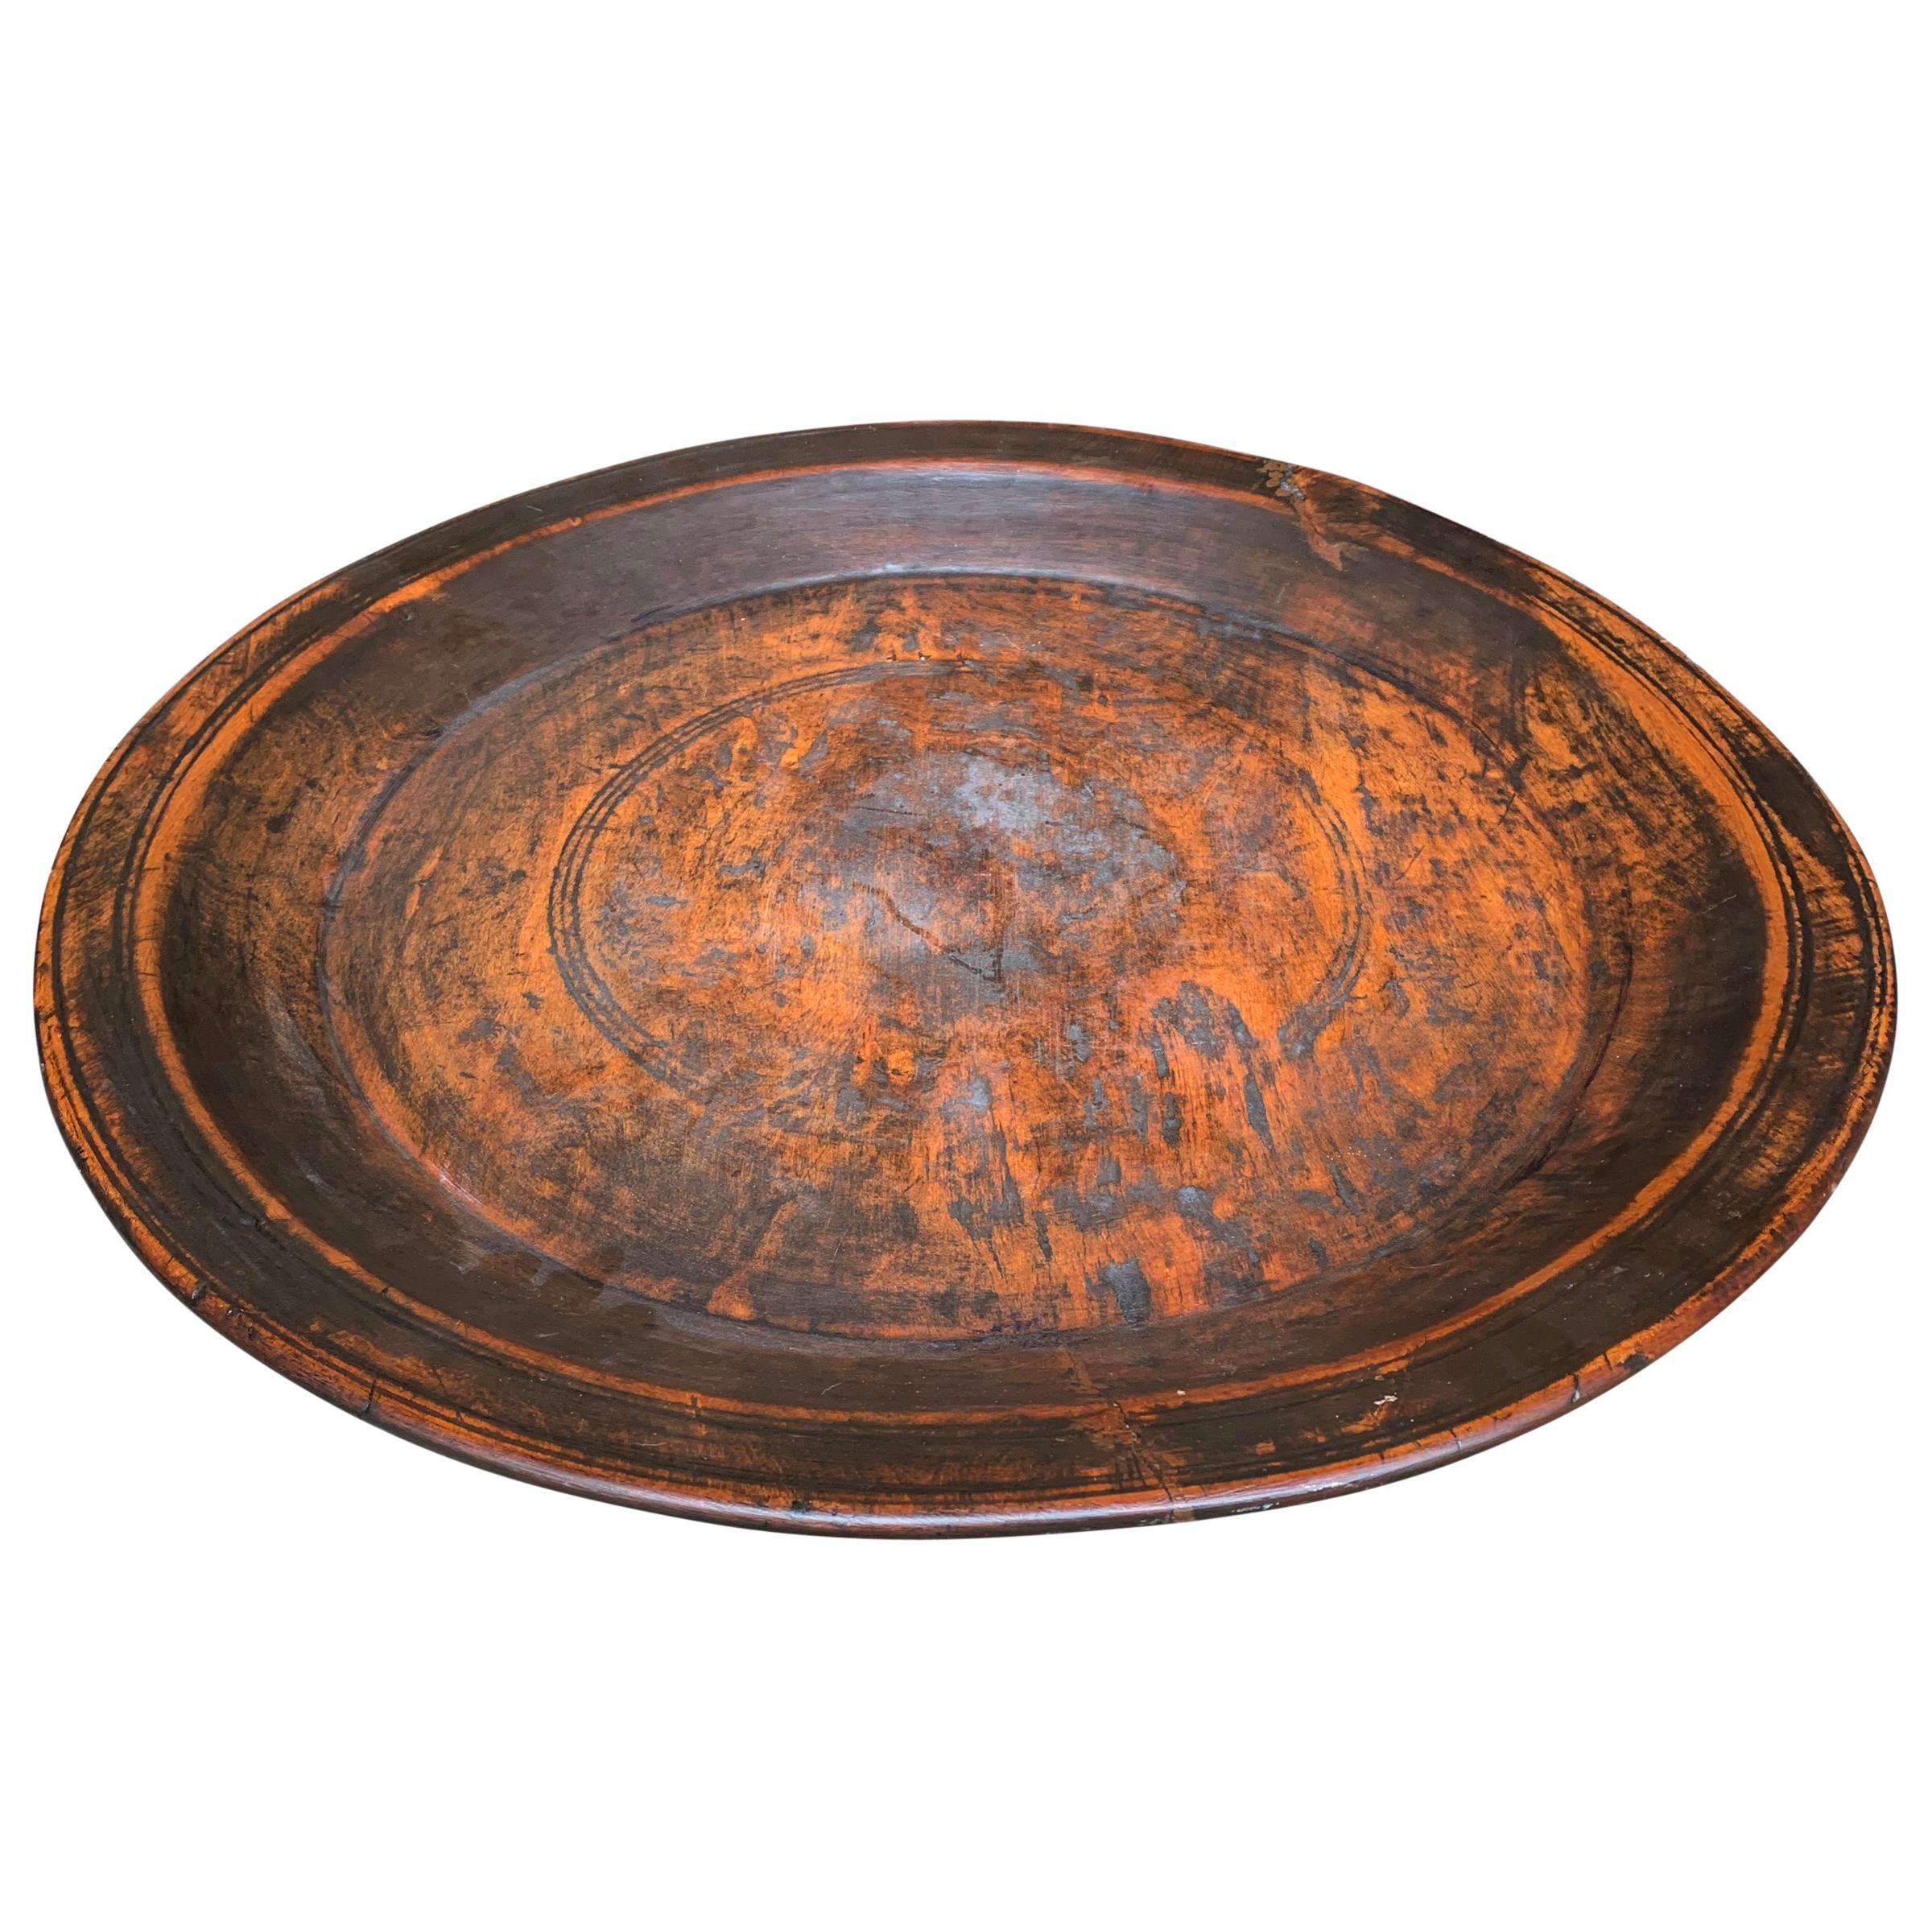 A wonderfully large 19th century turned wood tray with a beautiful patina, and a smooth finish. The reverse side shows several incised lines. Perfect for use as a catchall for mail, magazines, or any other myriad used.